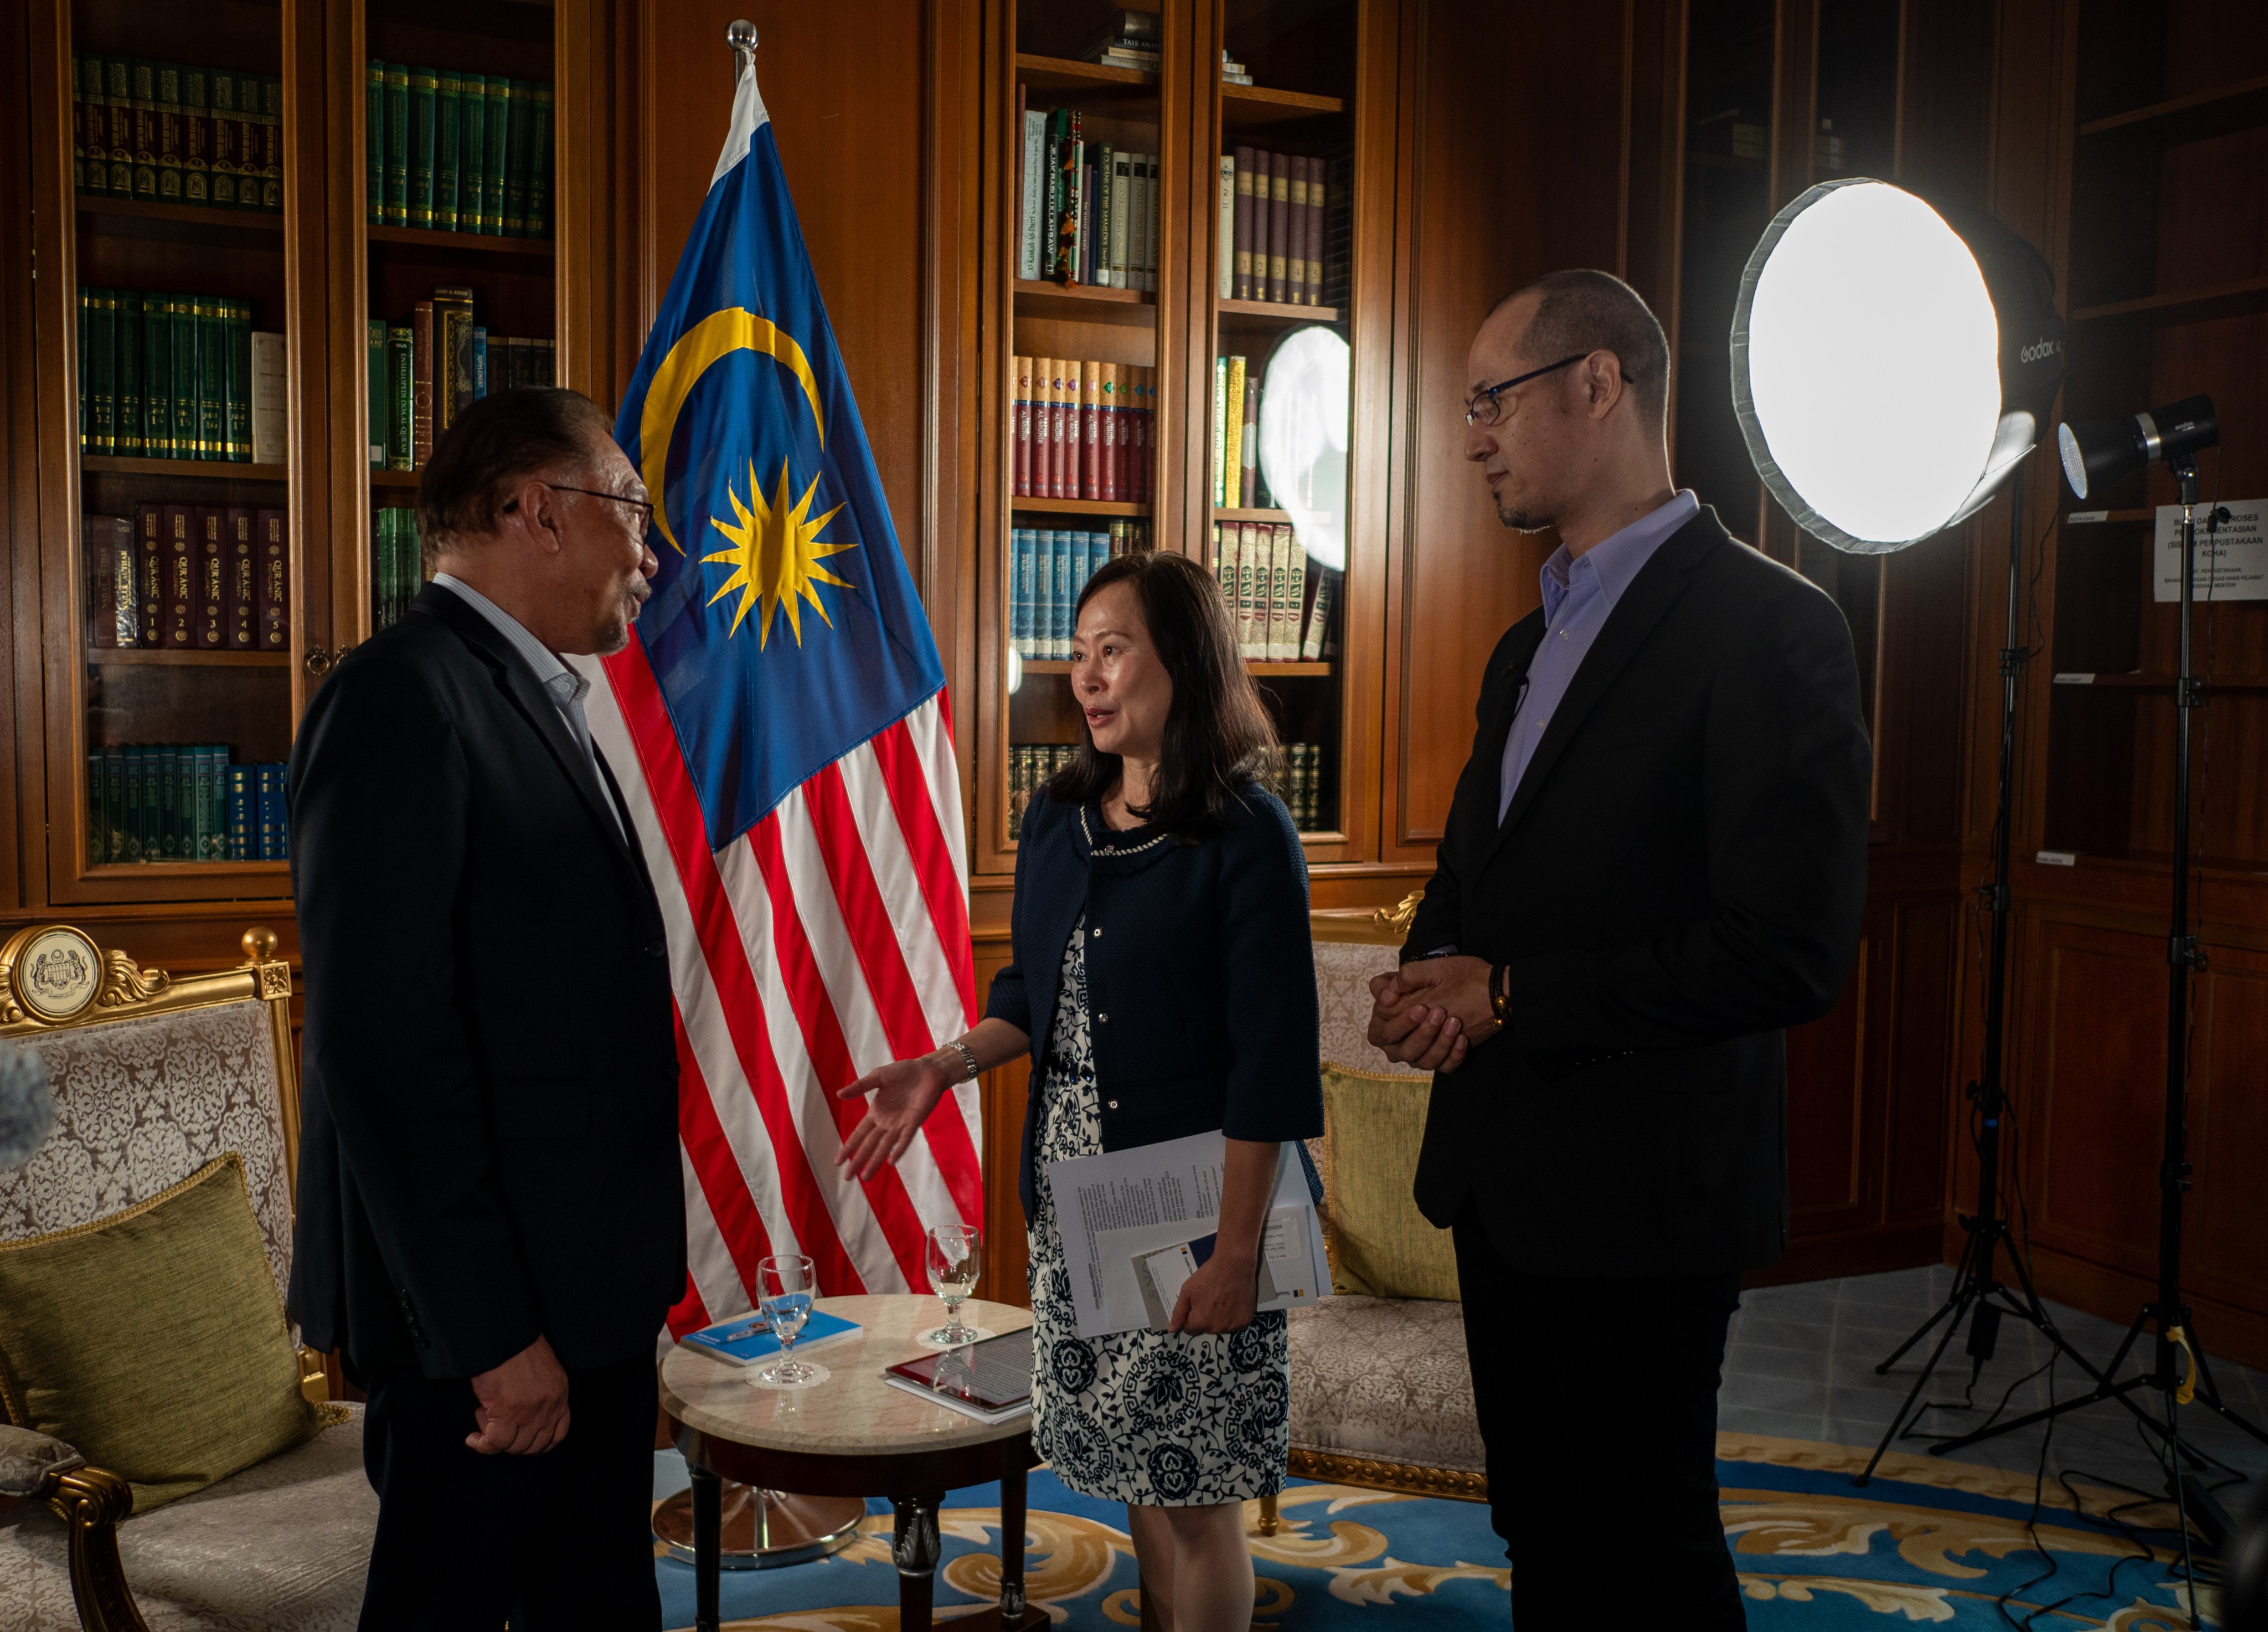 (From left) Malaysia’s prime minister meets the Post’s editor-in-chief Tammy Tam and managing editor for content Yonden Lhatoo at the leader’s office in Kuala Lumpur. Photo: Hadi Azmi